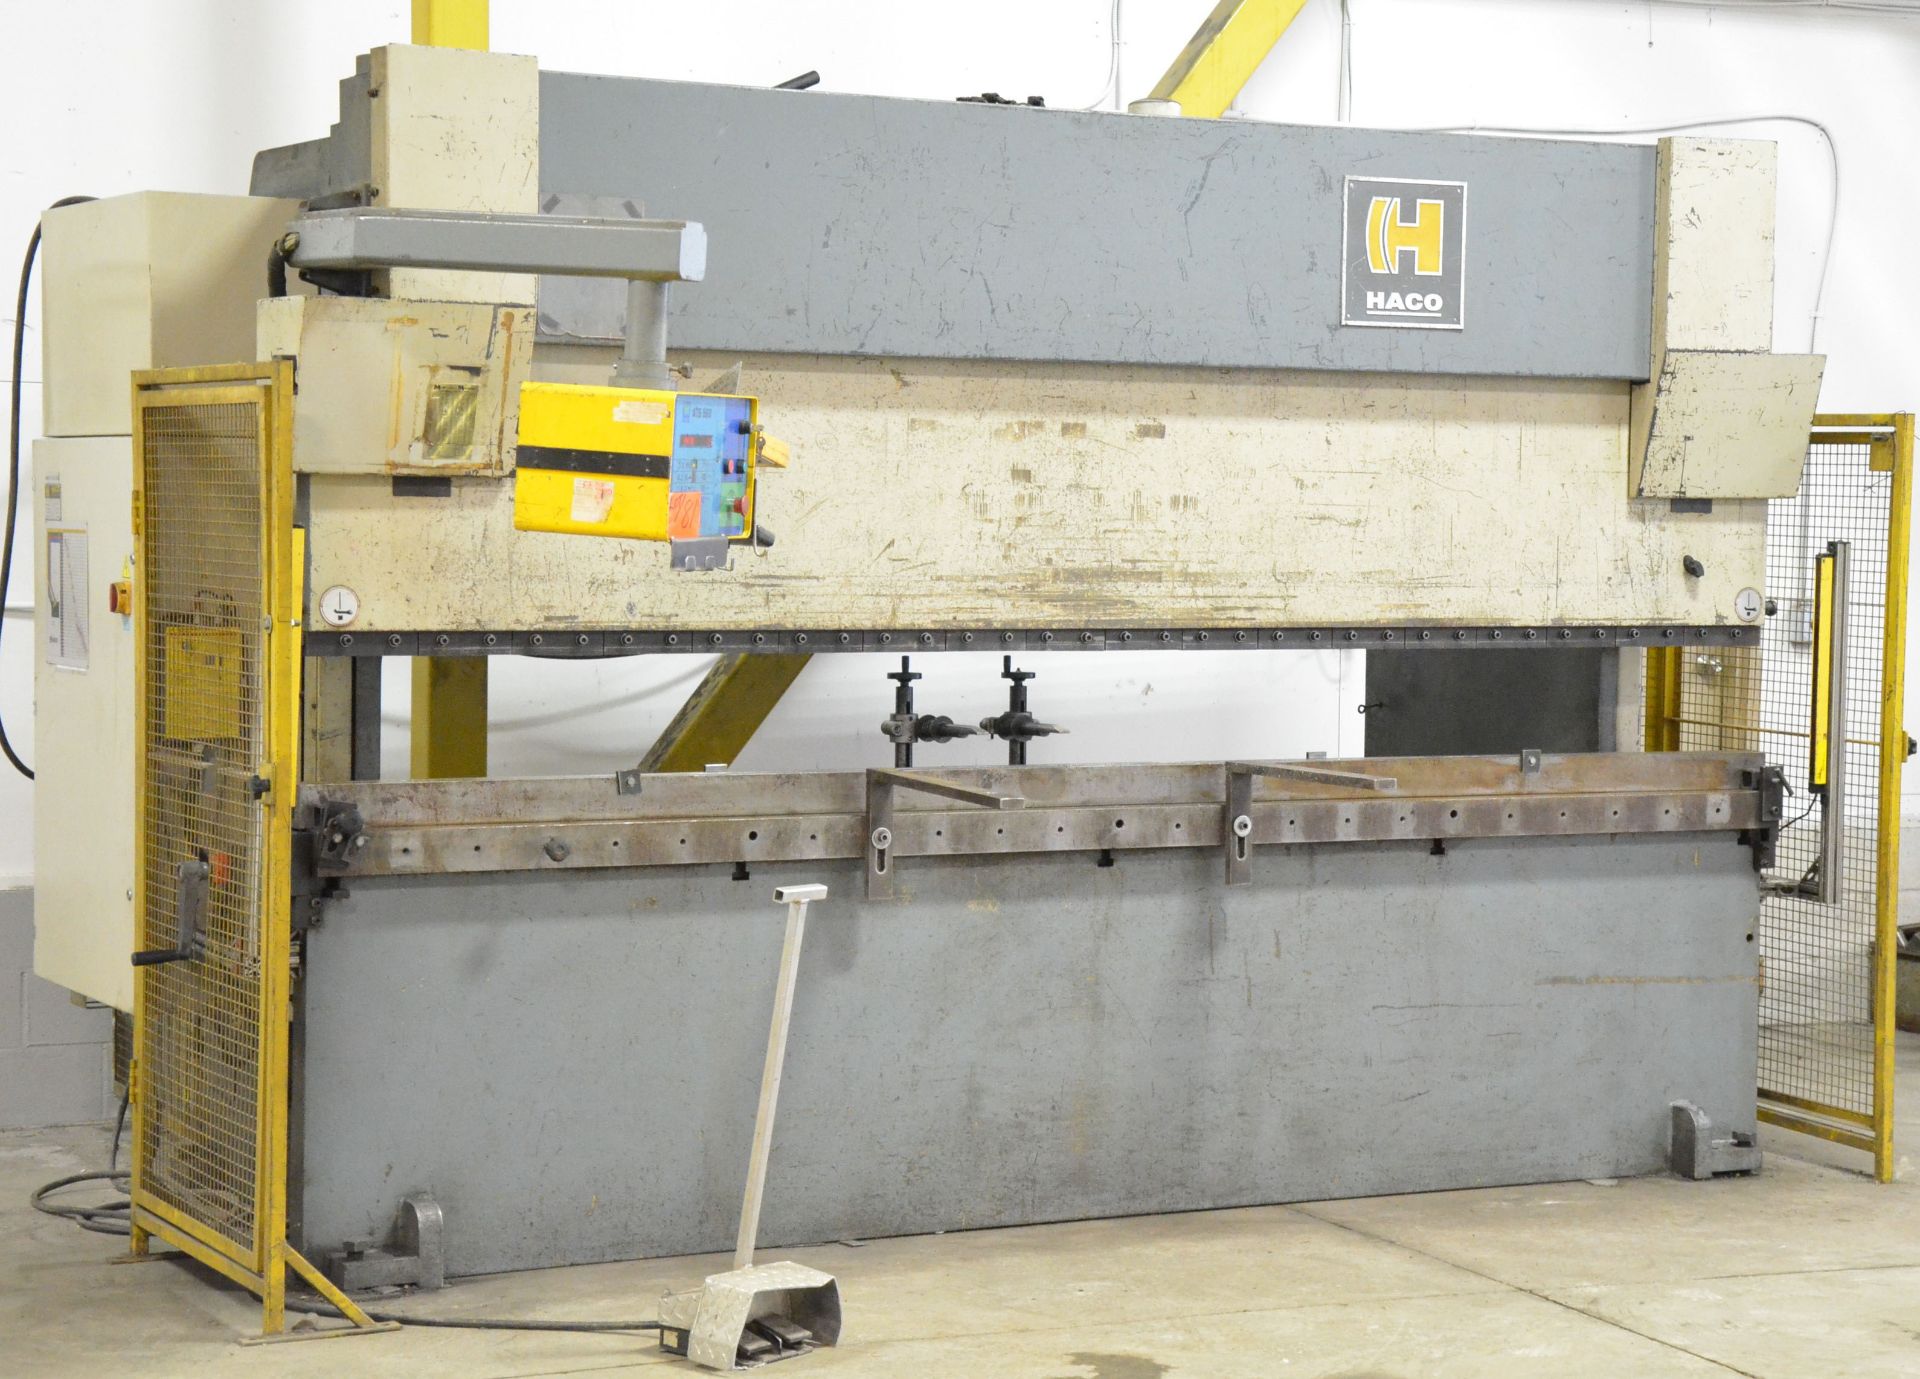 HACO (2005) ERMS 36-150 12' X 150 TON CNC HYDRAULIC BRAKE PRESS WITH HACO ATS 2-AXIS CNC BACK GAUGE, - Image 4 of 10